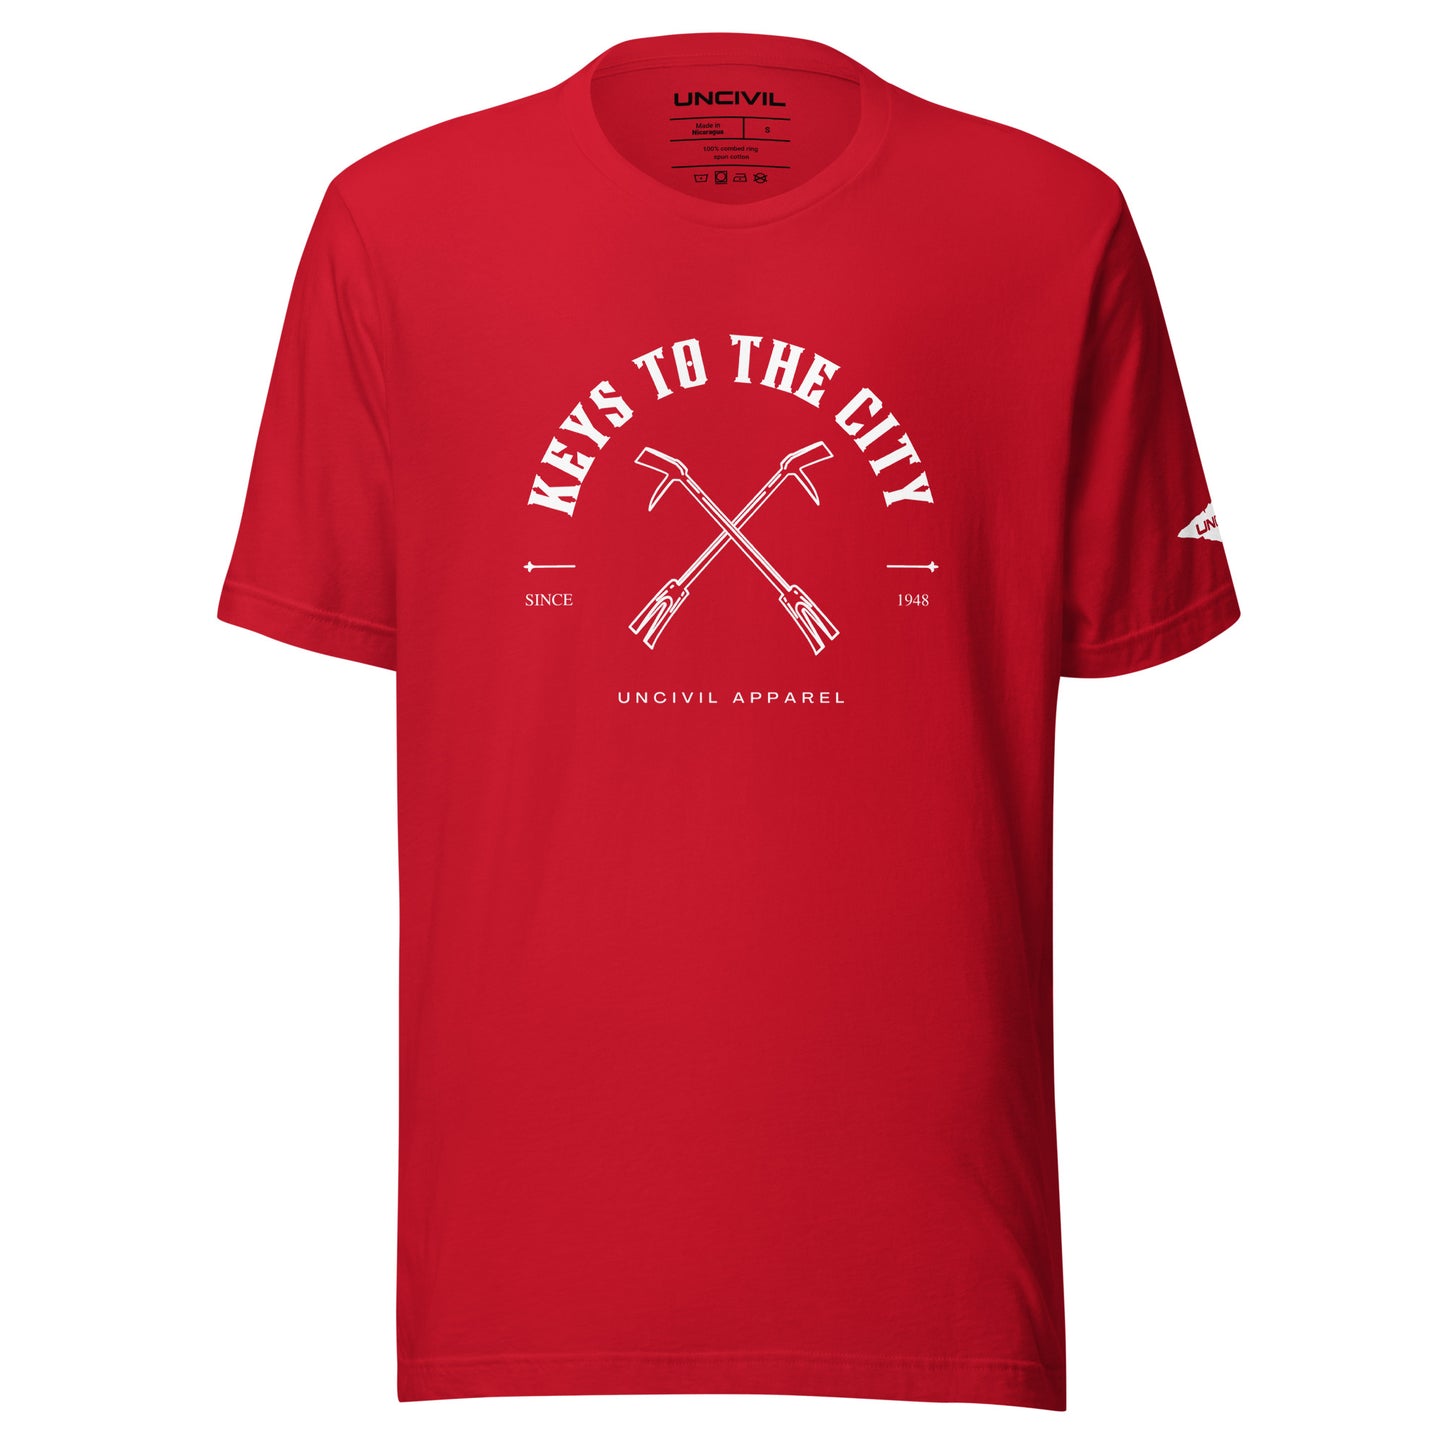 Keys to the City, Halligan Bar Design, Red Unisex T-shirt for Firefighters